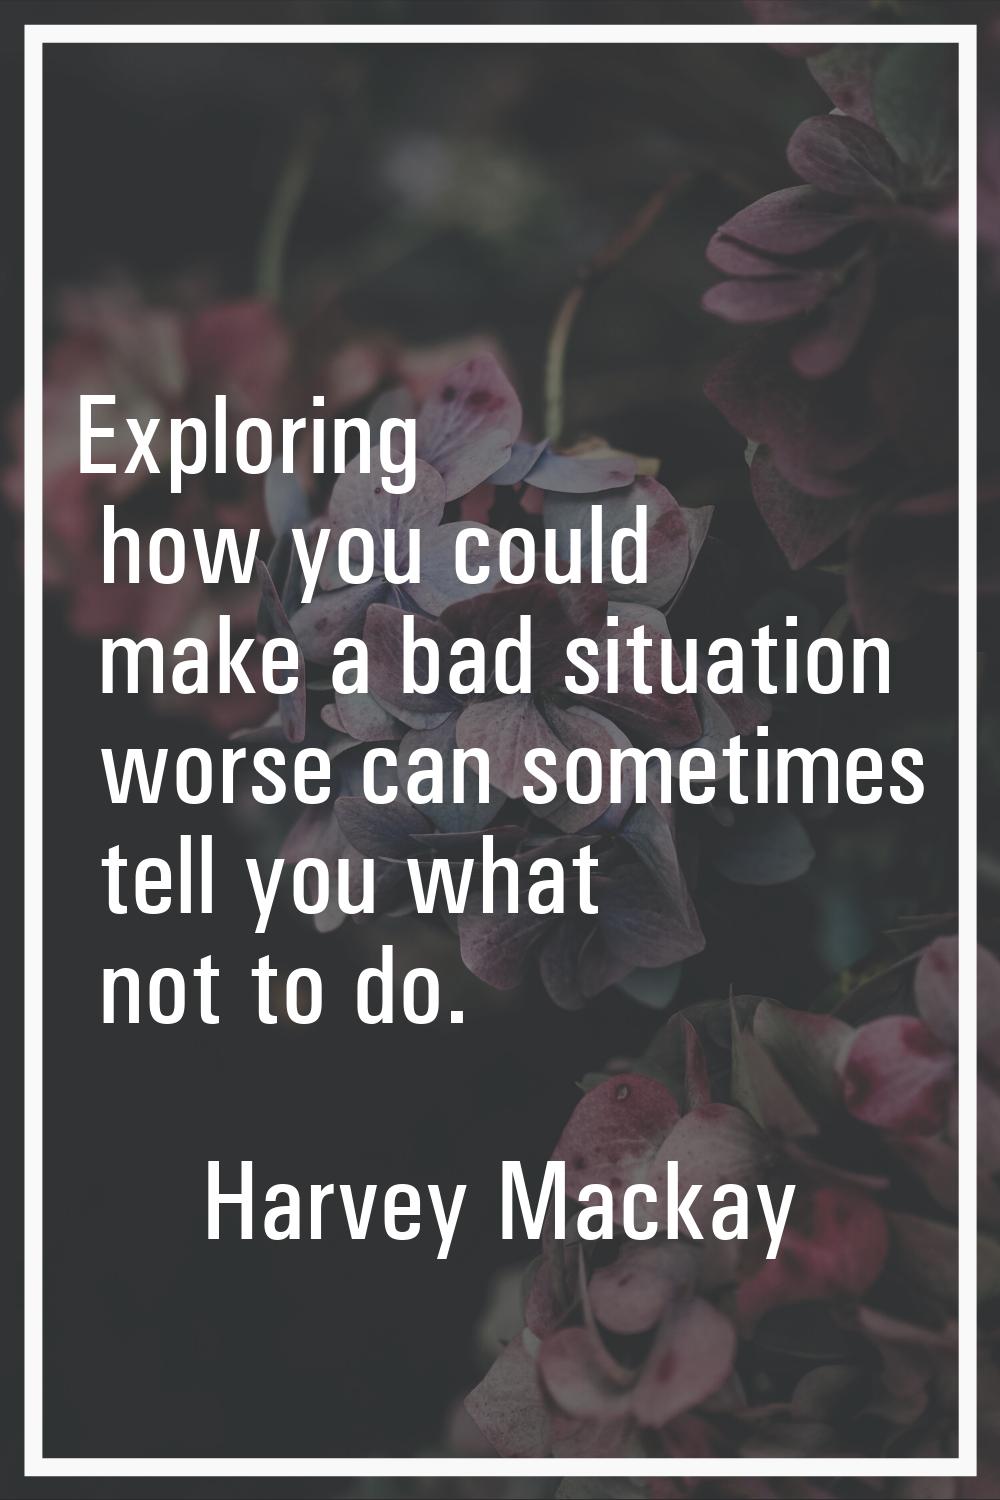 Exploring how you could make a bad situation worse can sometimes tell you what not to do.